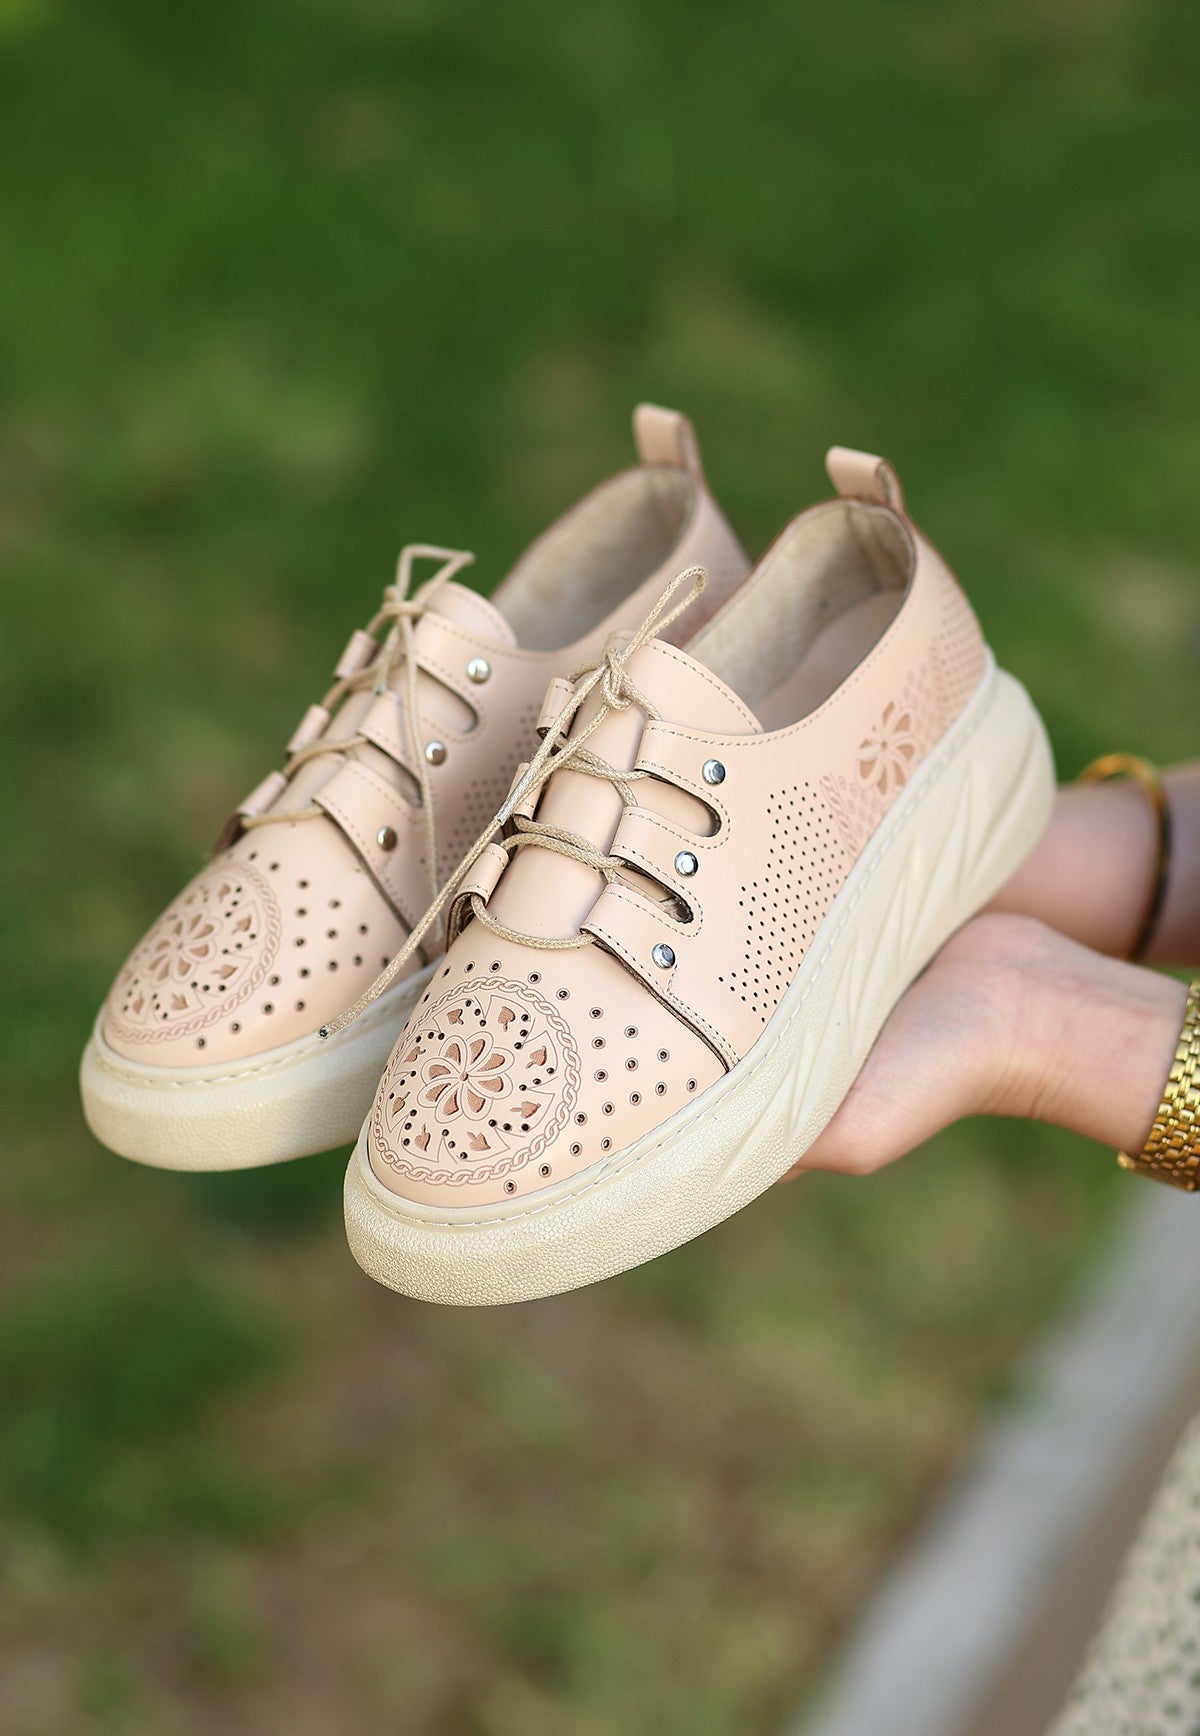 Women's Down Nude Leather Laced Sports Shoes - STREETMODE™